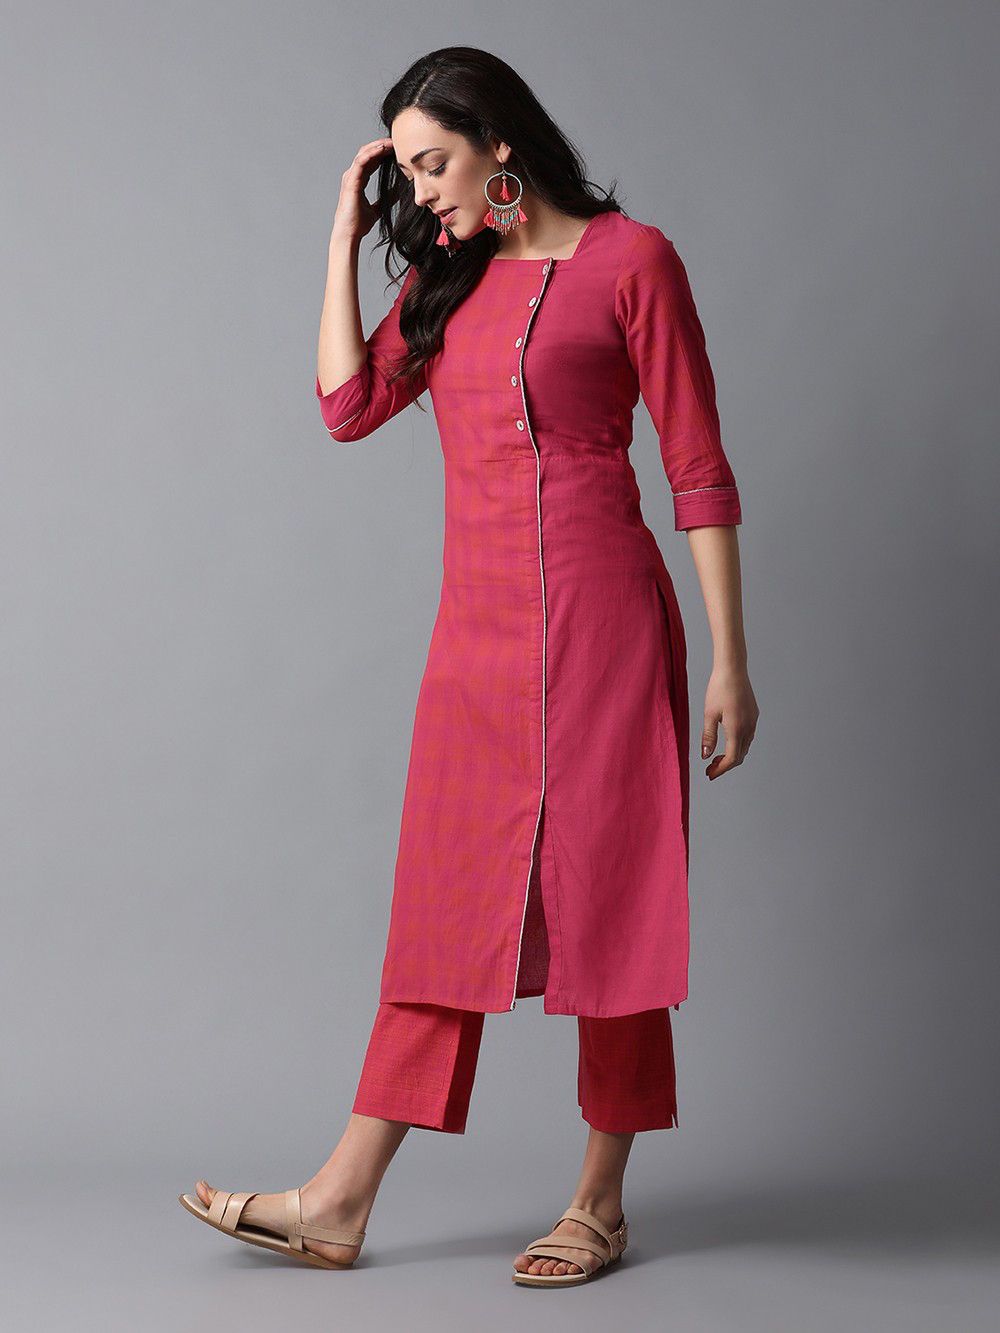 Latest Kurti Neck Designs For Salwar Suit Images With | My XXX Hot Girl